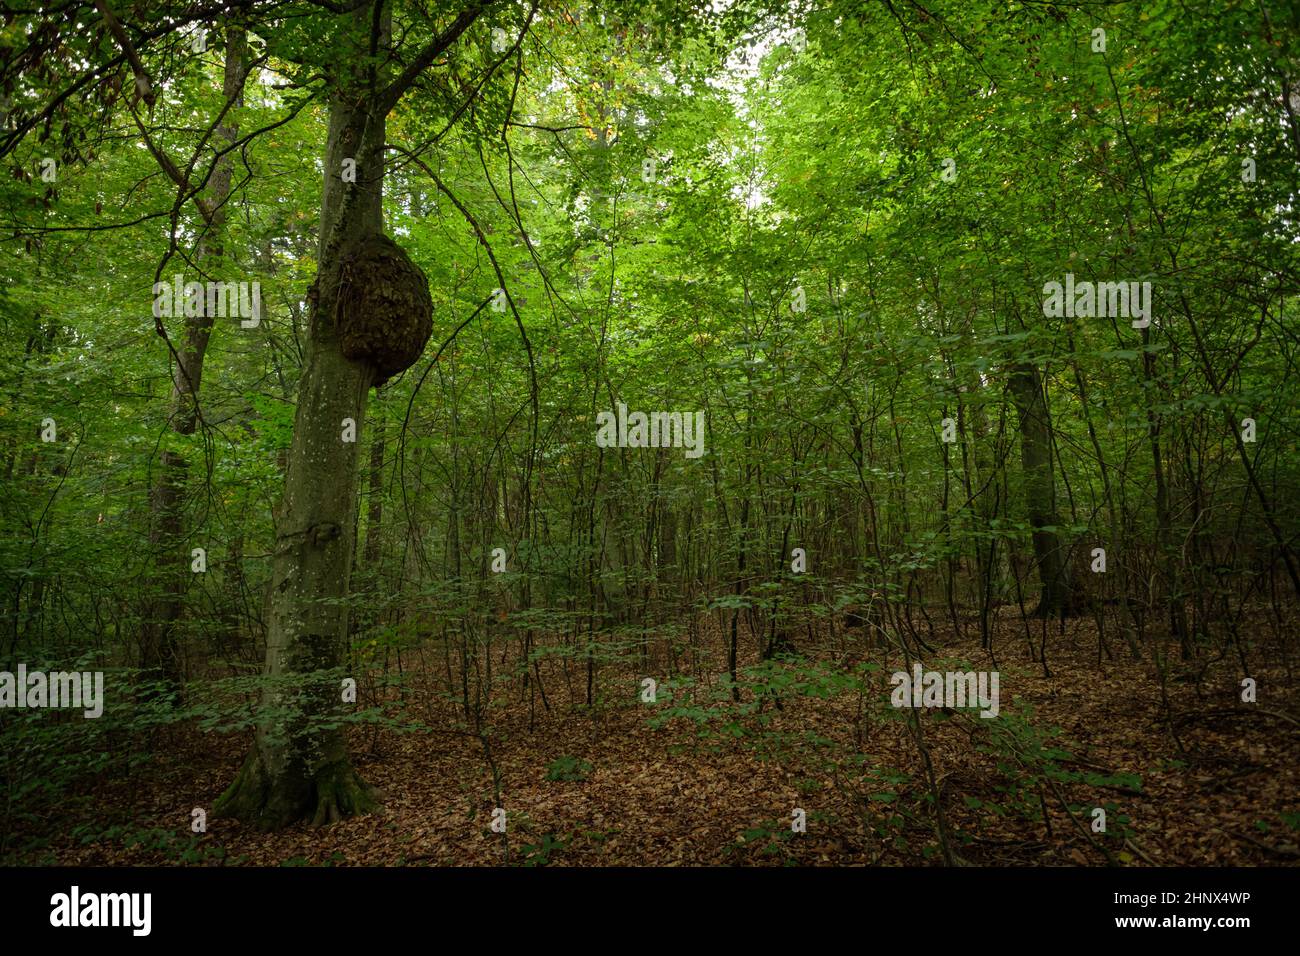 Tree cancer at a trunk in a forest landscape Stock Photo